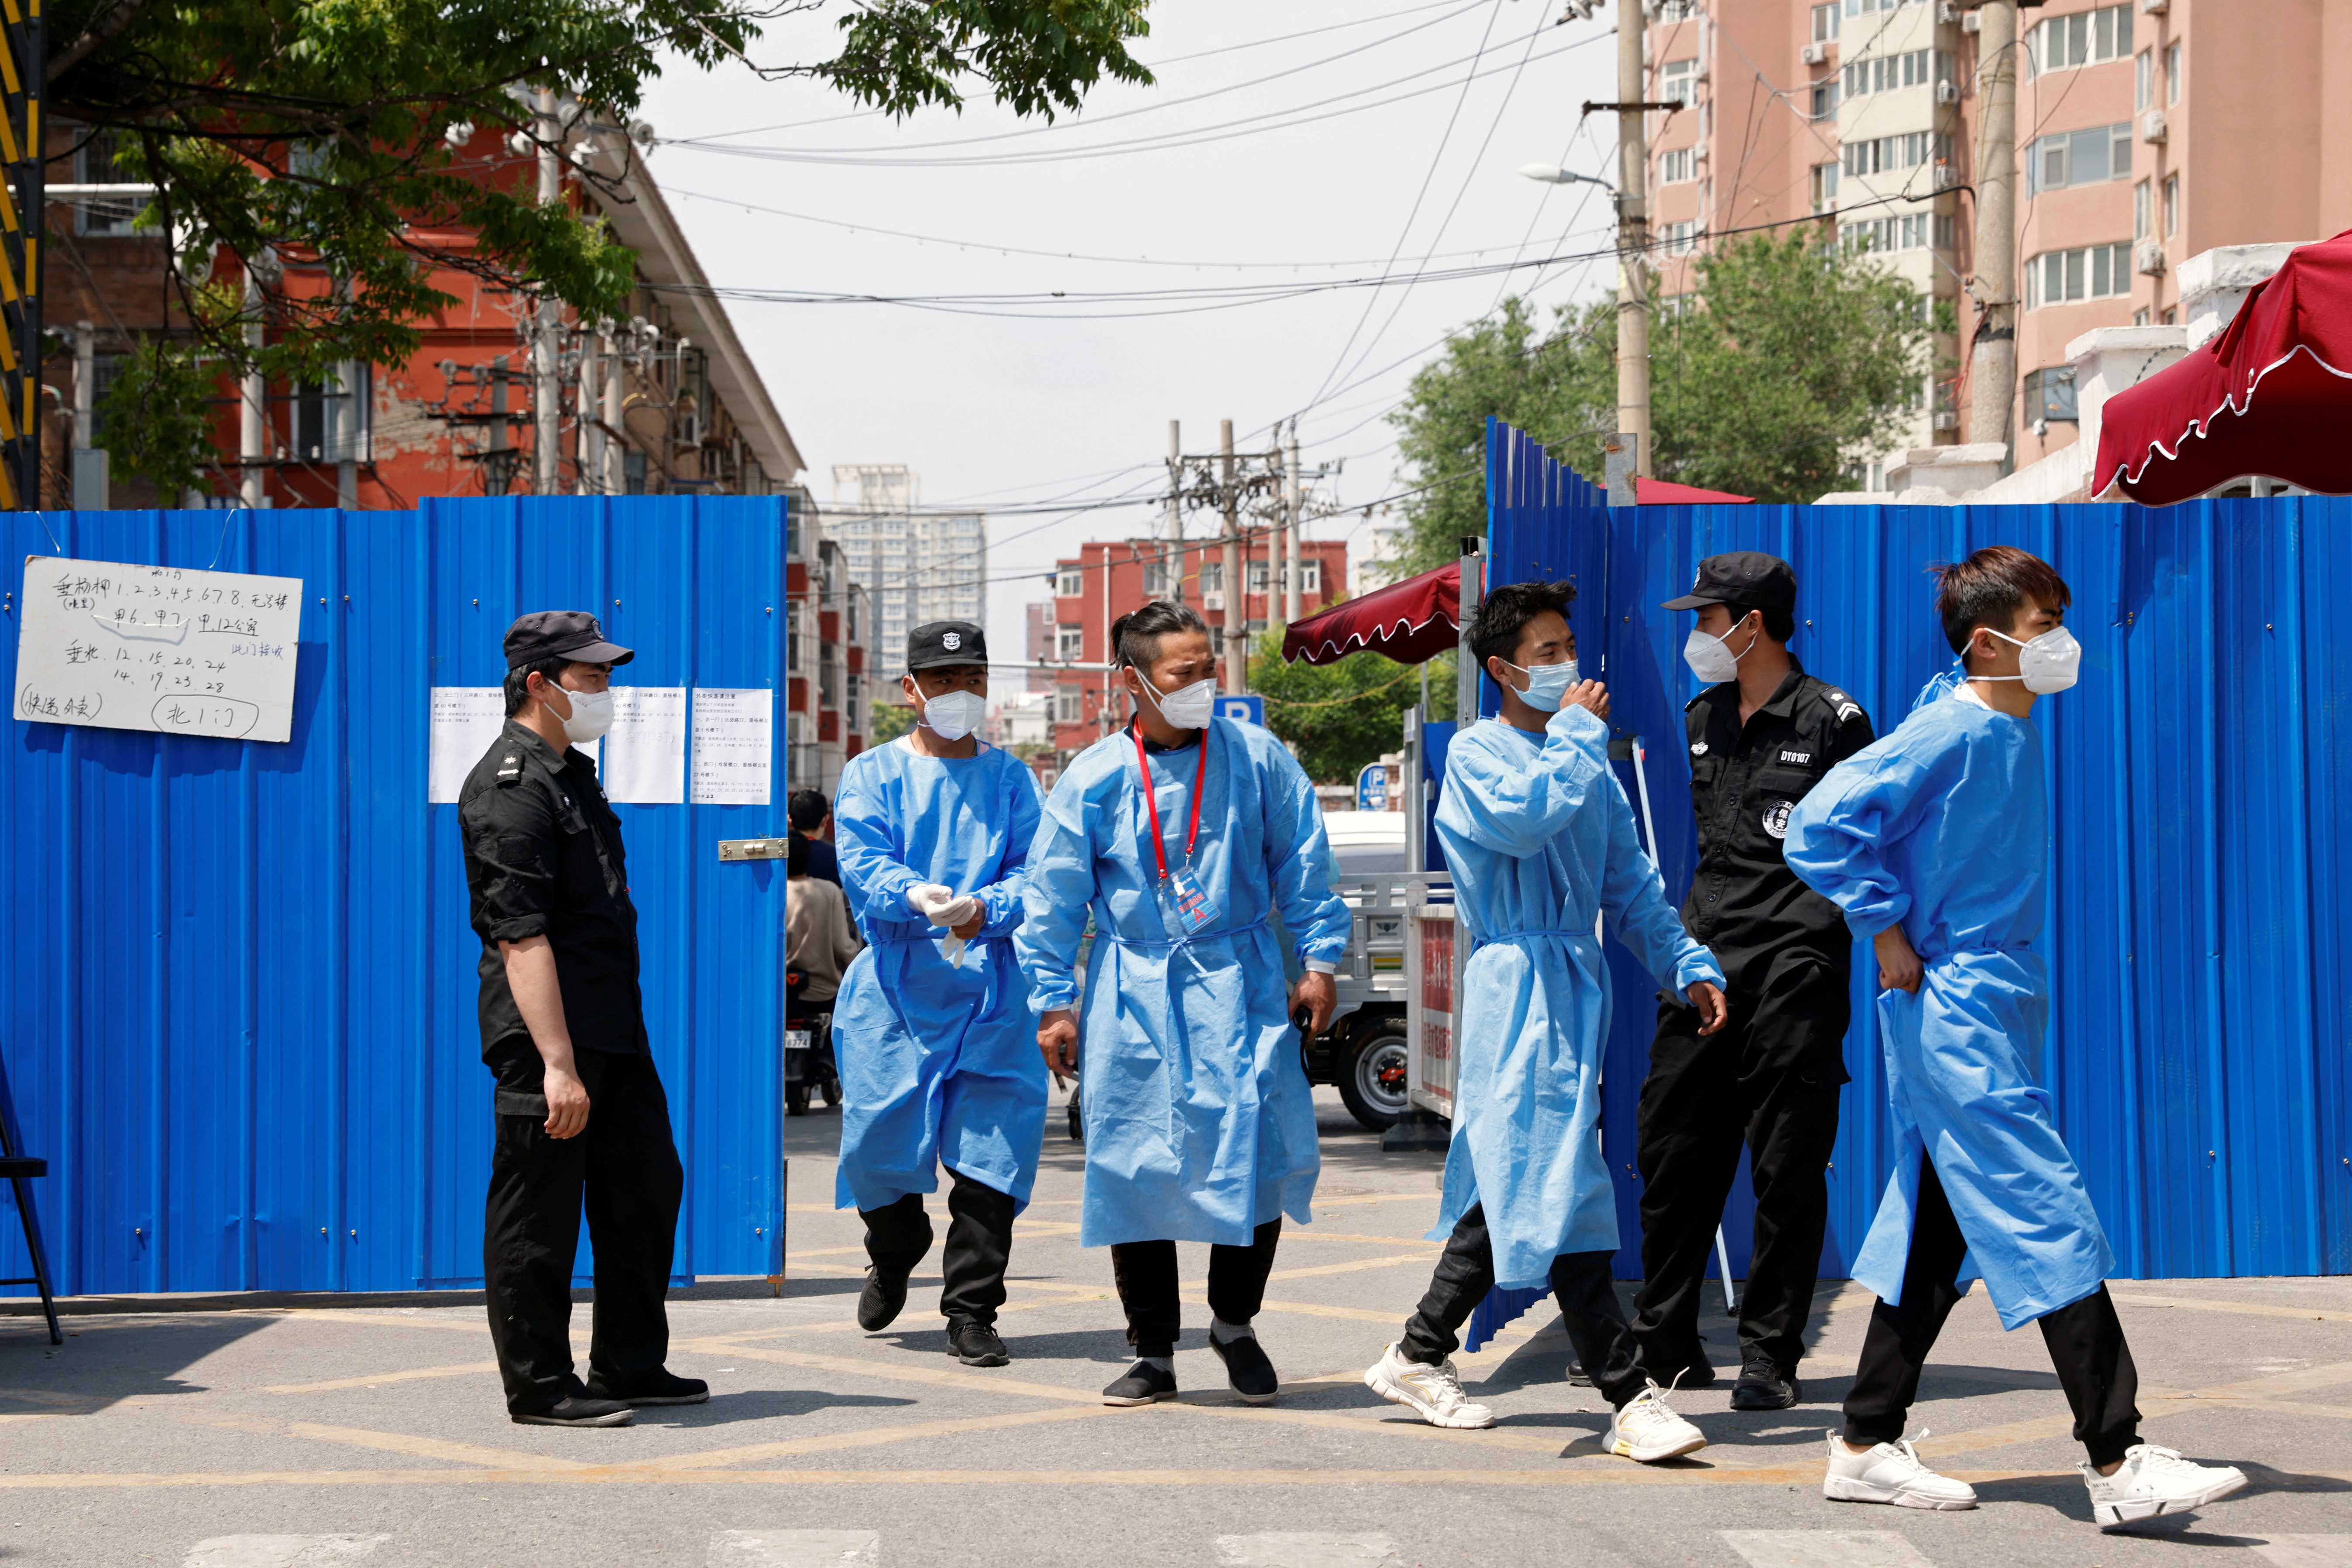 Workers in protective suits walk through the gate of a barricaded residential area under lockdown, amid the coronavirus disease (COVID-19) outbreak in Beijing, China May 17, 2022. REUTERS/Carlos Garcia Rawlins